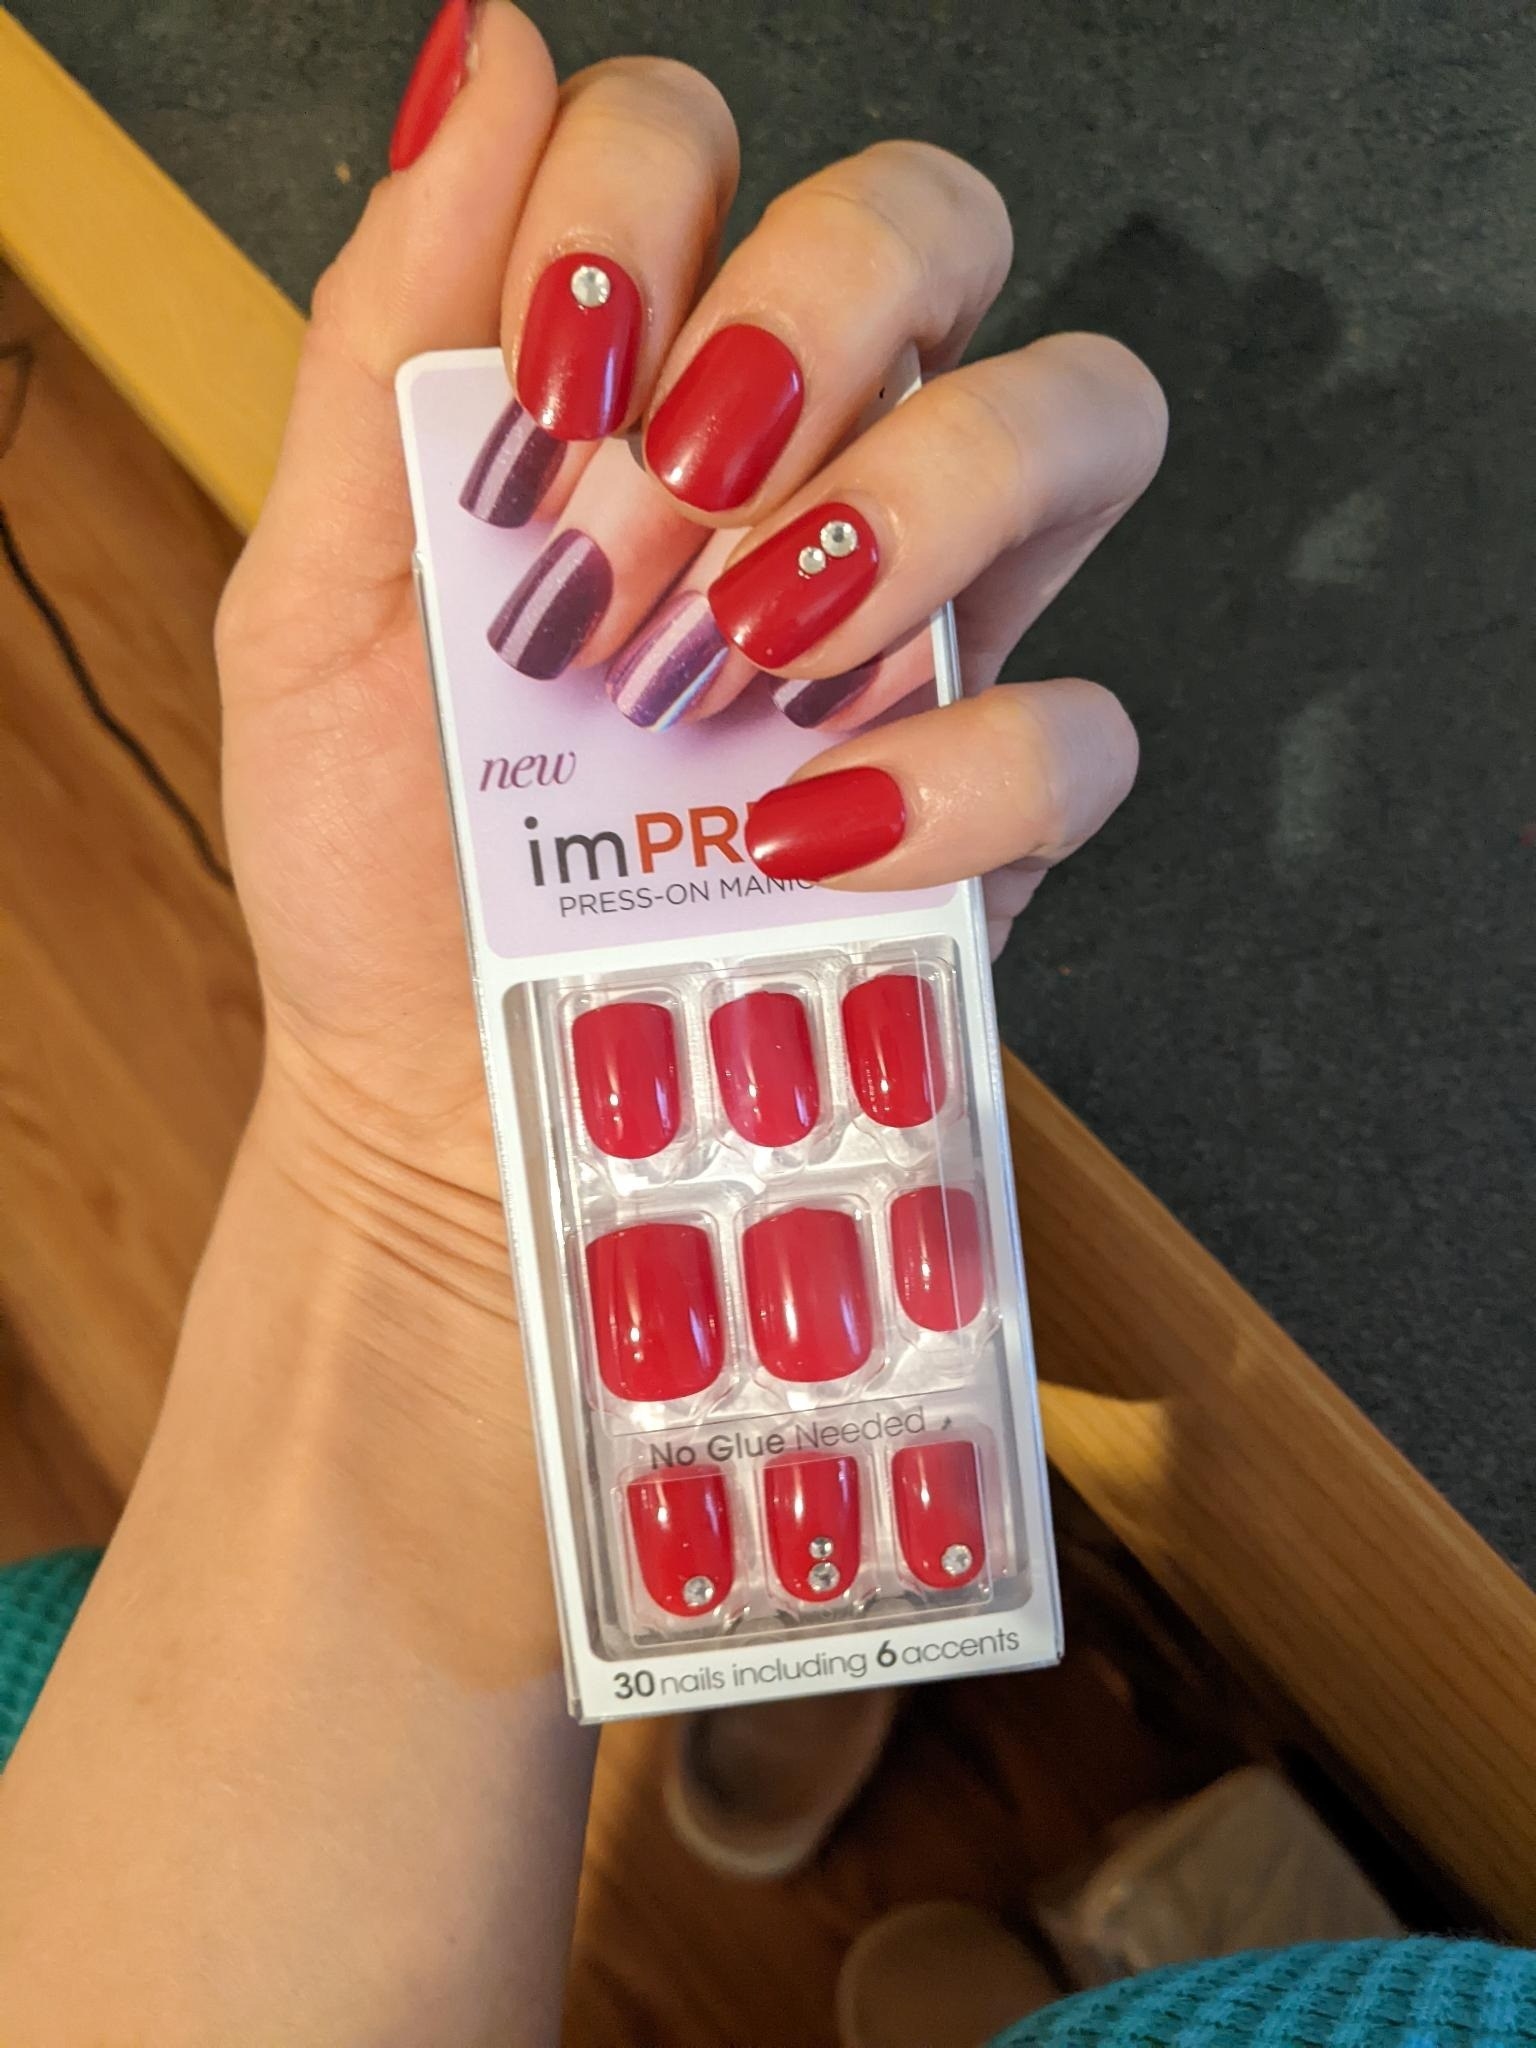 Someone wearing the press-on nails and holding the packaging